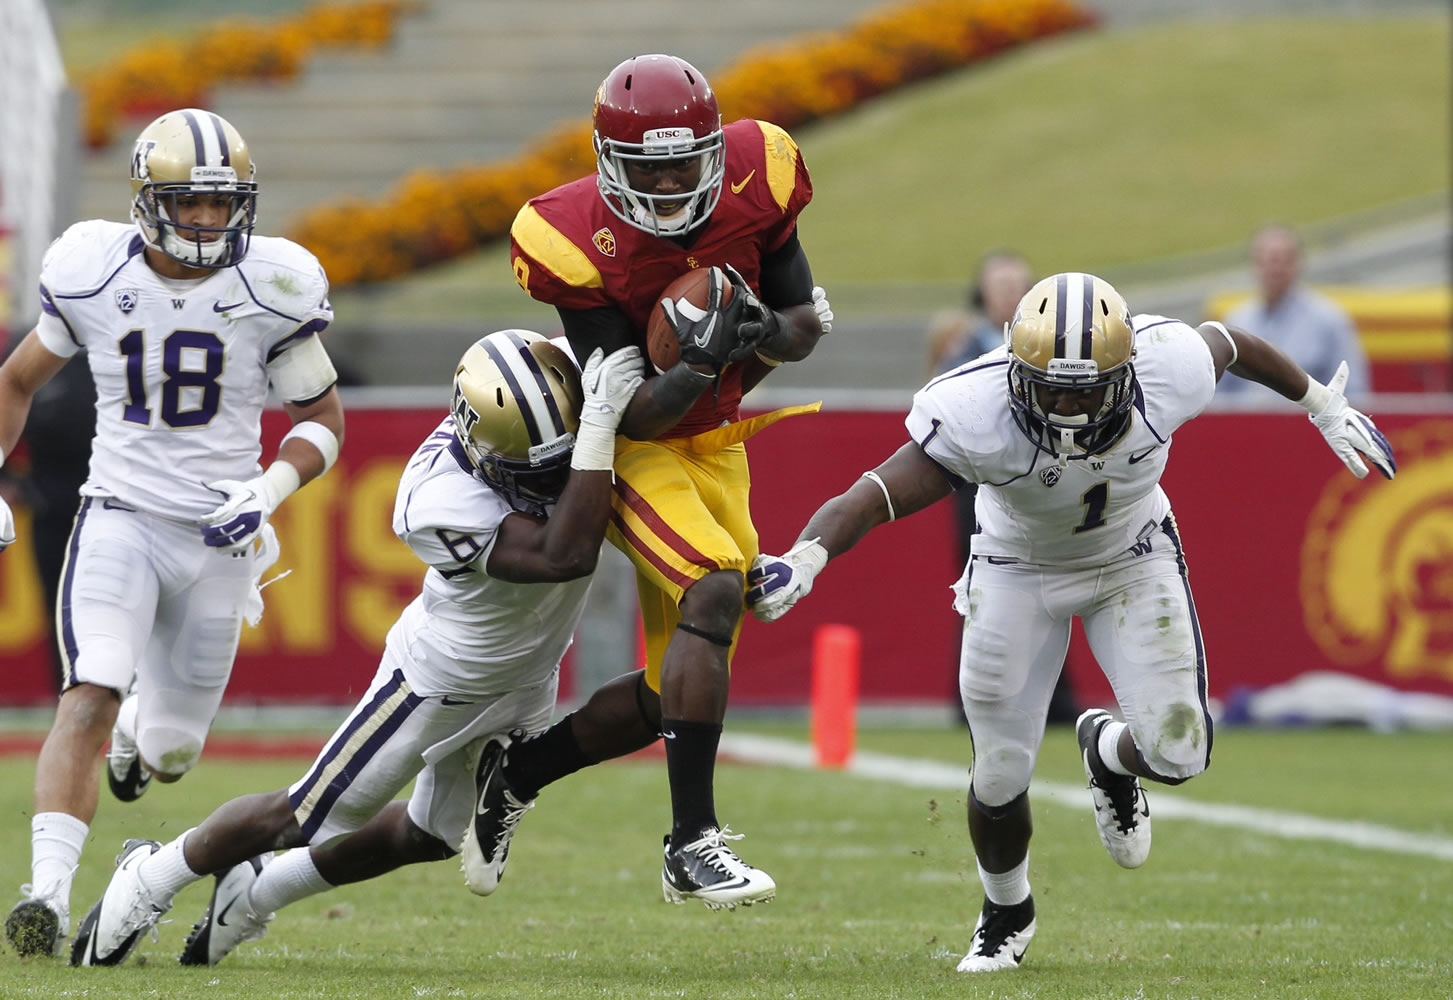 Southern California's Marquise Lee is tackled by Washington's Desmond Trufant after a 14-yard gain in the second half Saturday.